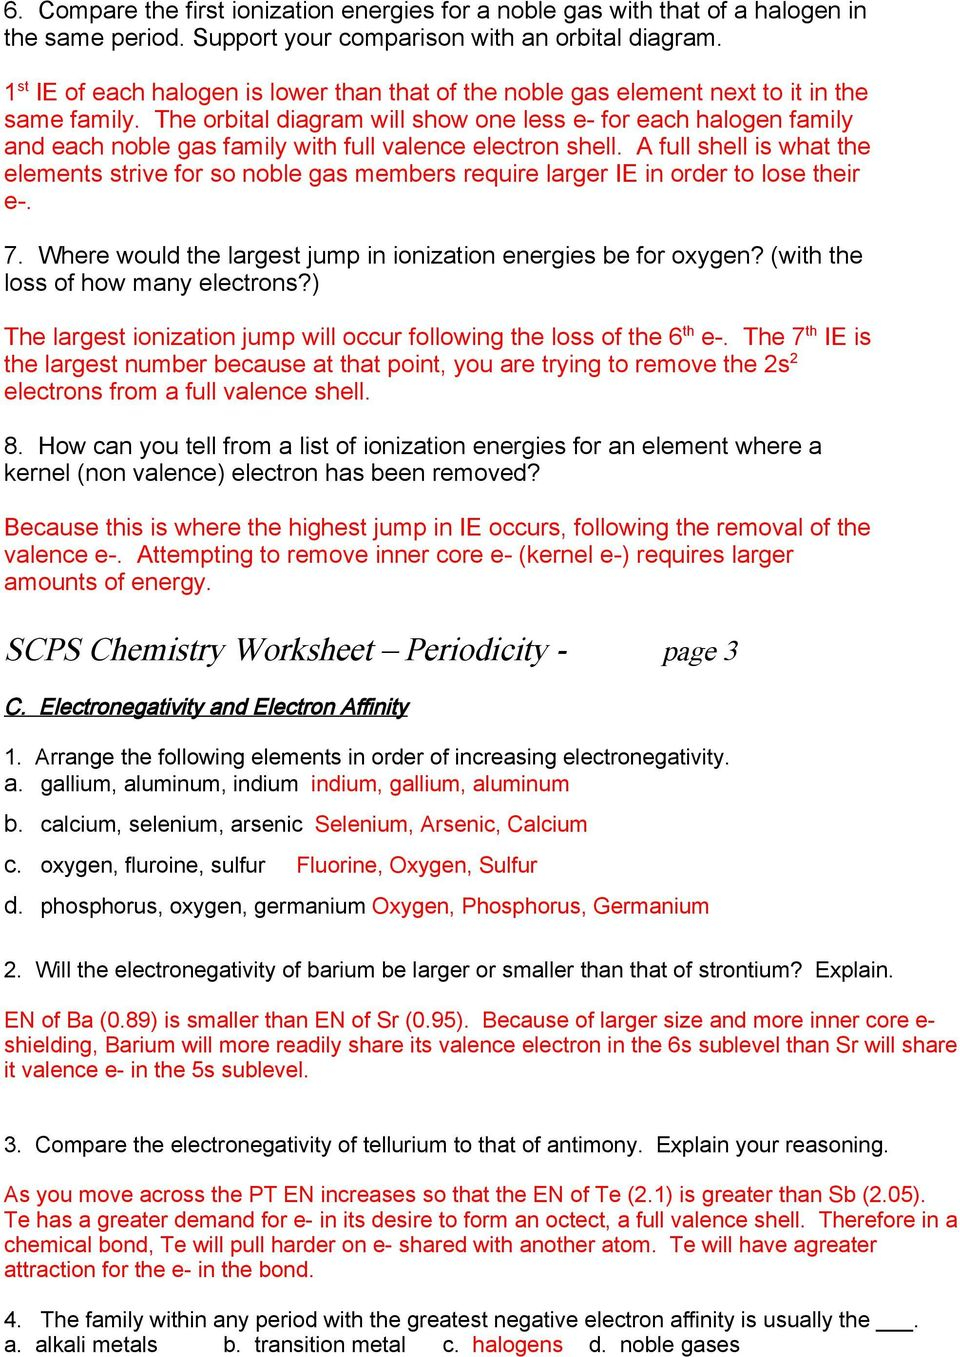 Orbital Diagram For Arsenic Scps Chemistry Worksheet Periodicity A Periodic Table 1 Which Are